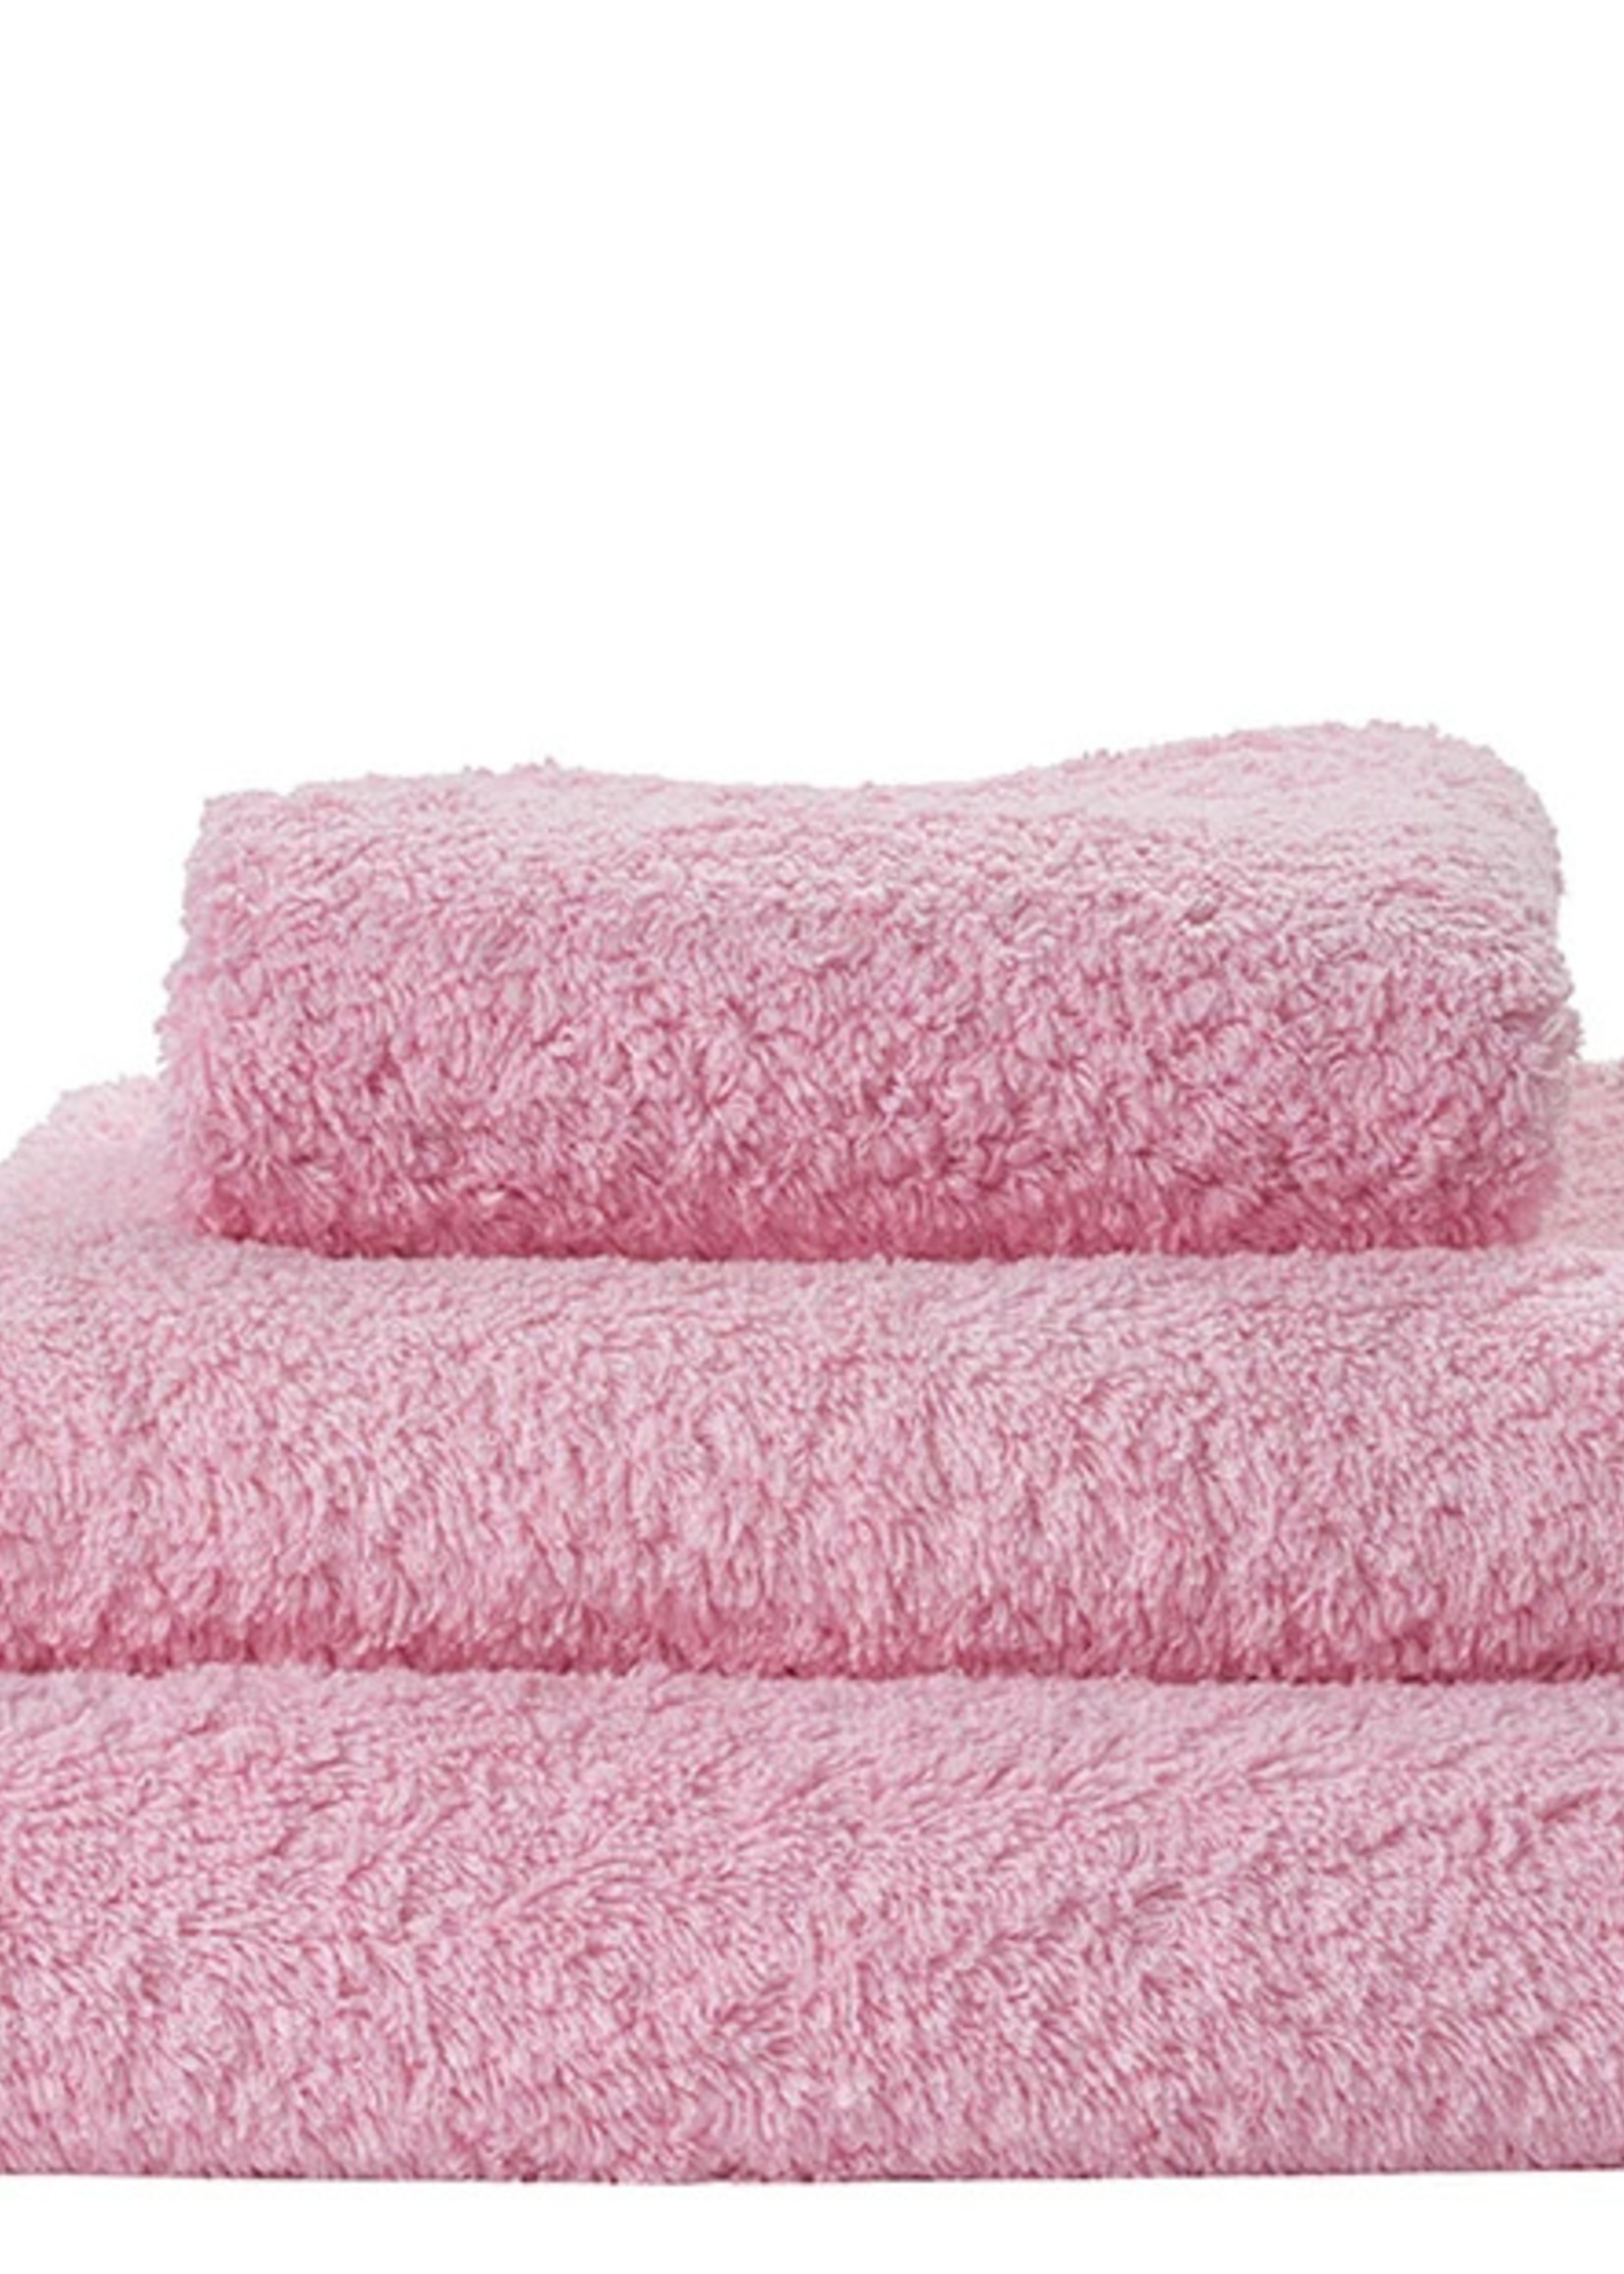 Abyss & Habidecor Super Pile Pink Lady Towels